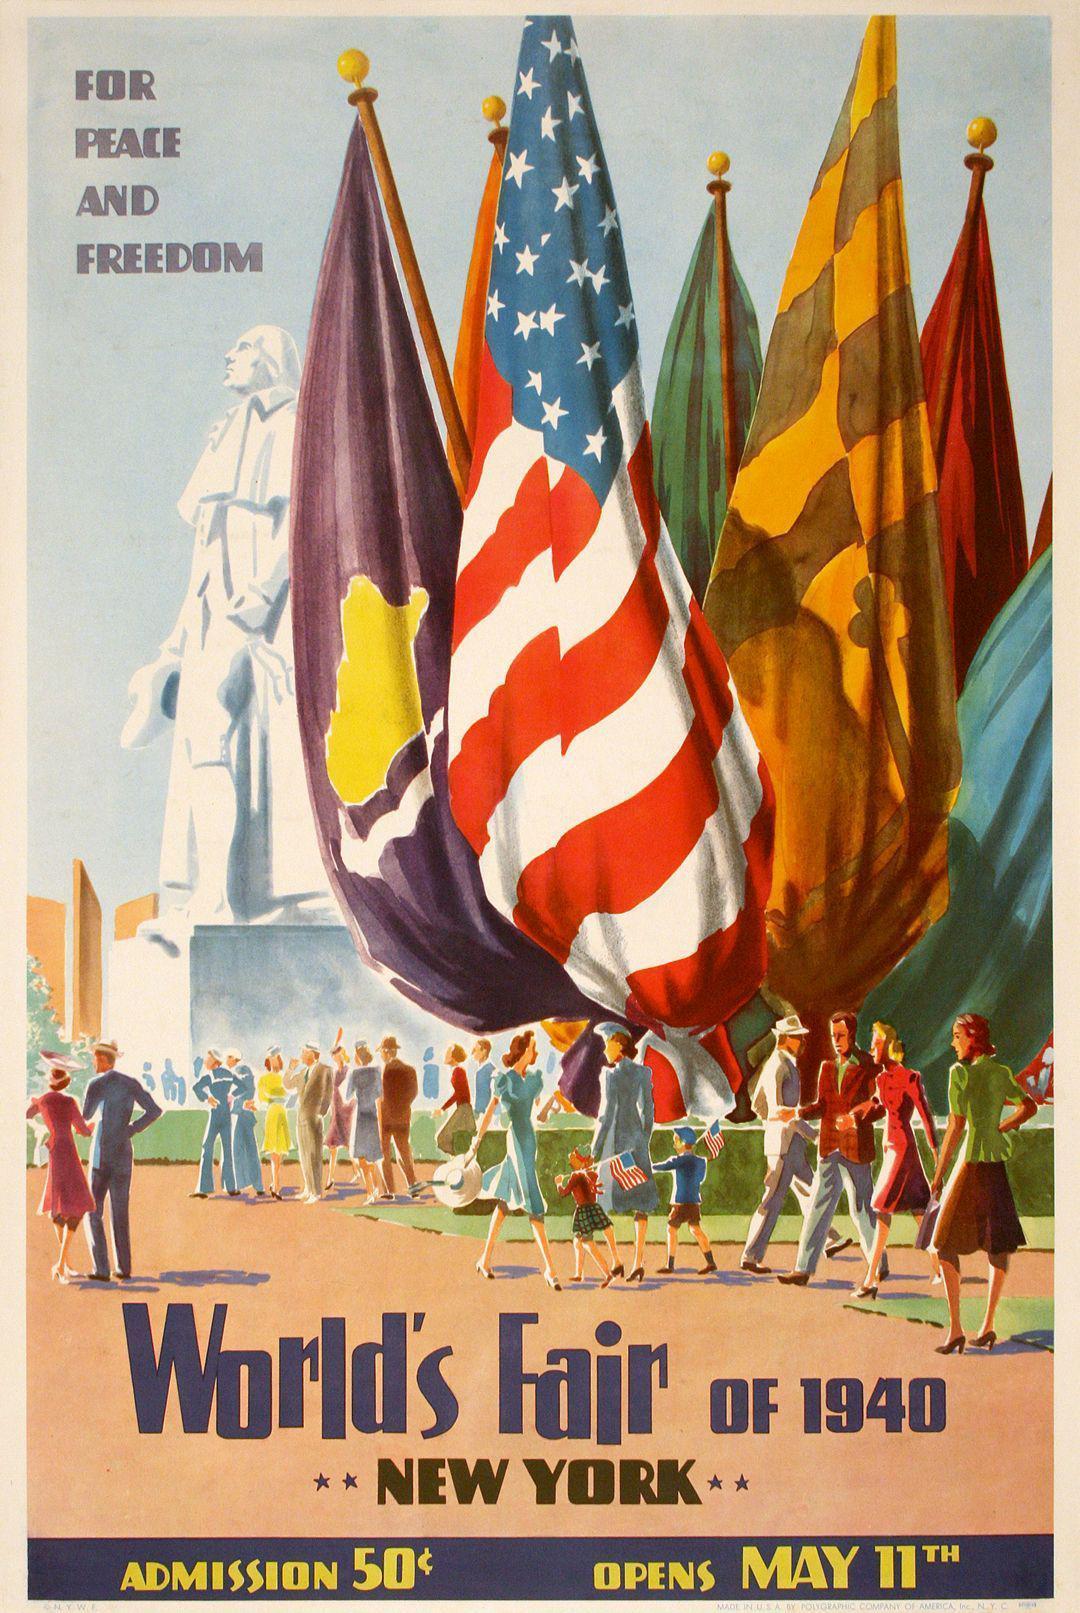 Original American Poster - New York World's Fair of 1940 fo Peace and Freedom